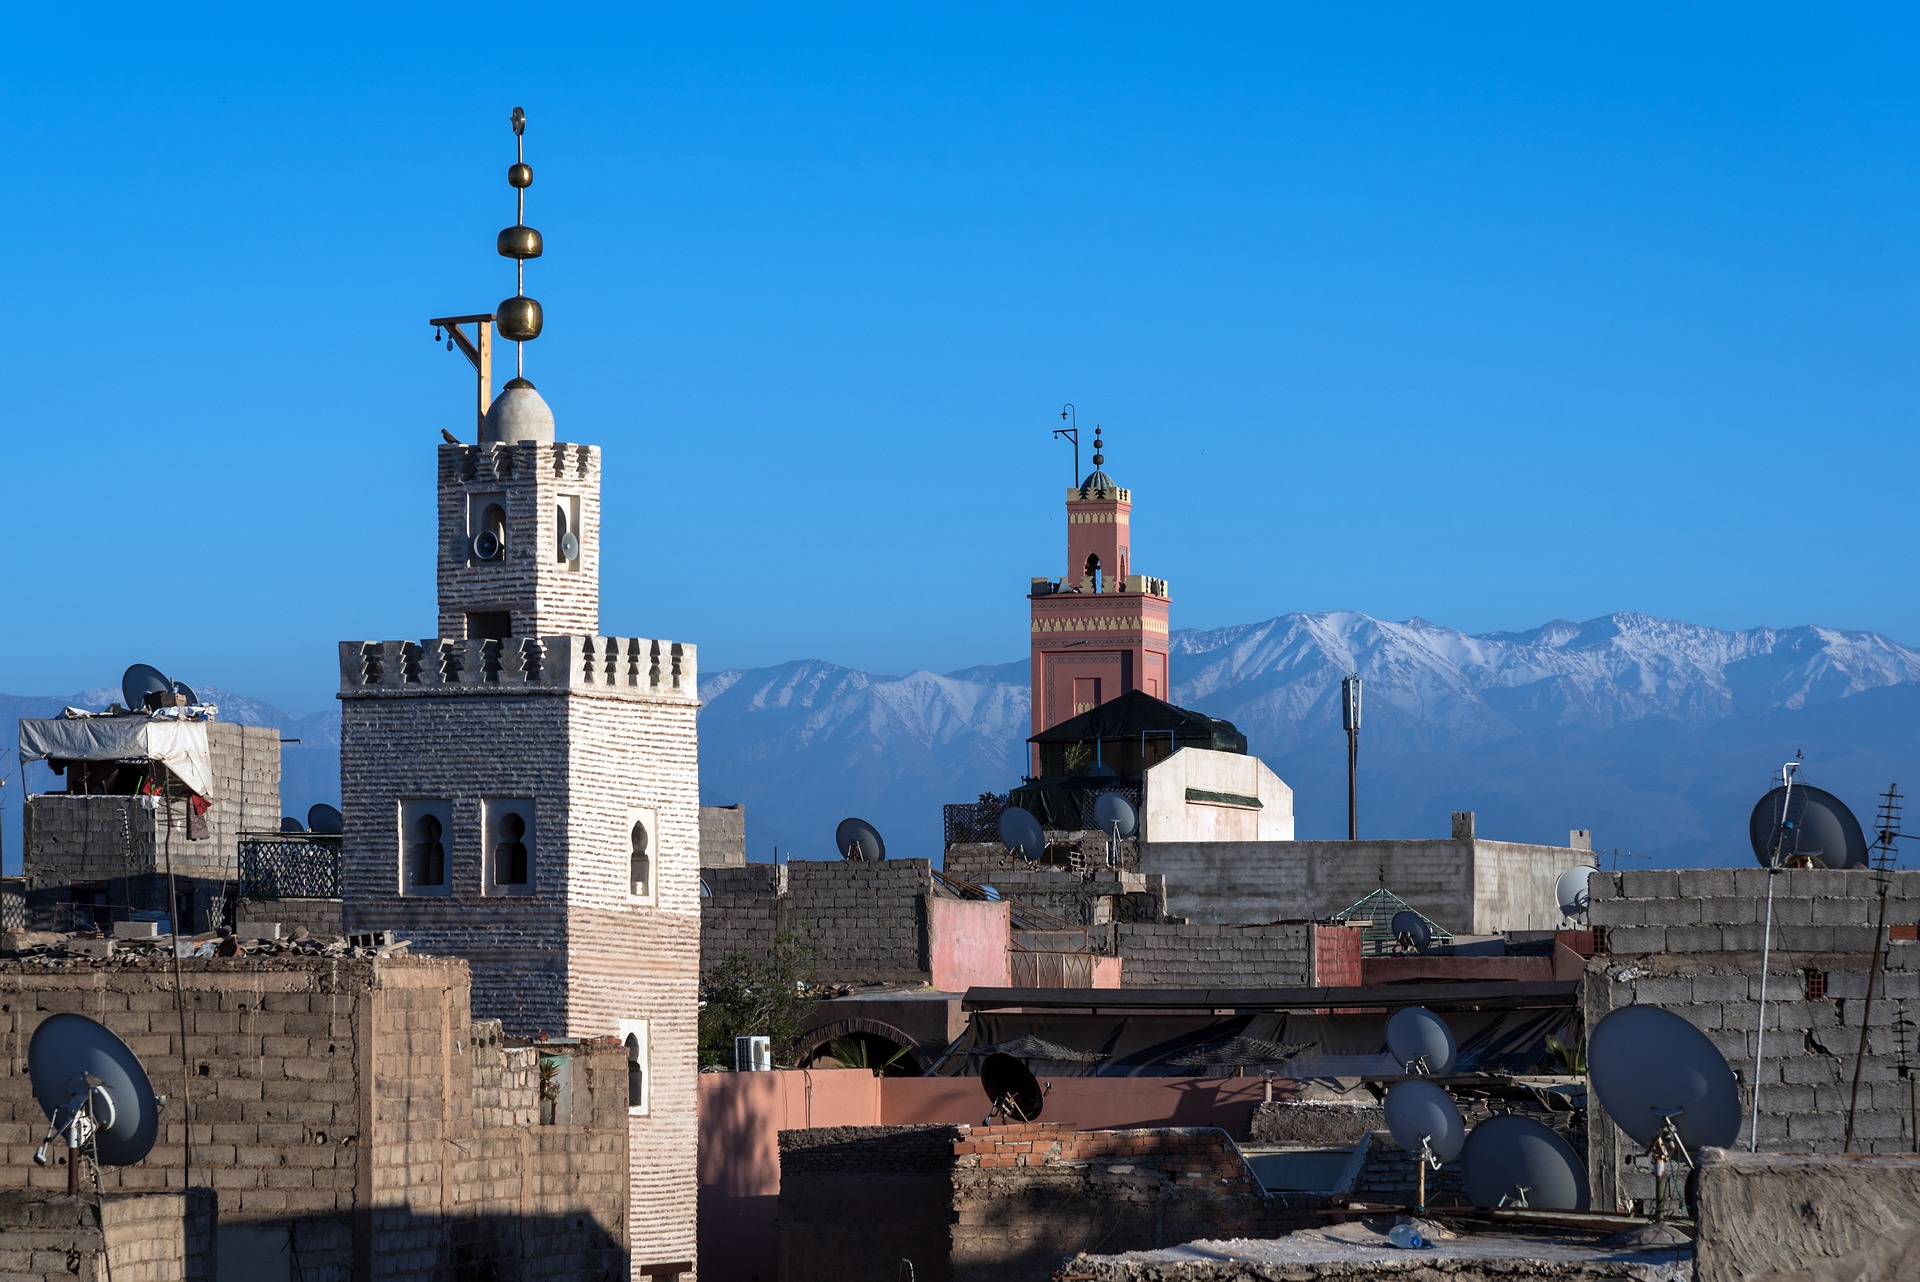 Morocco imperial cities started from Marrakech